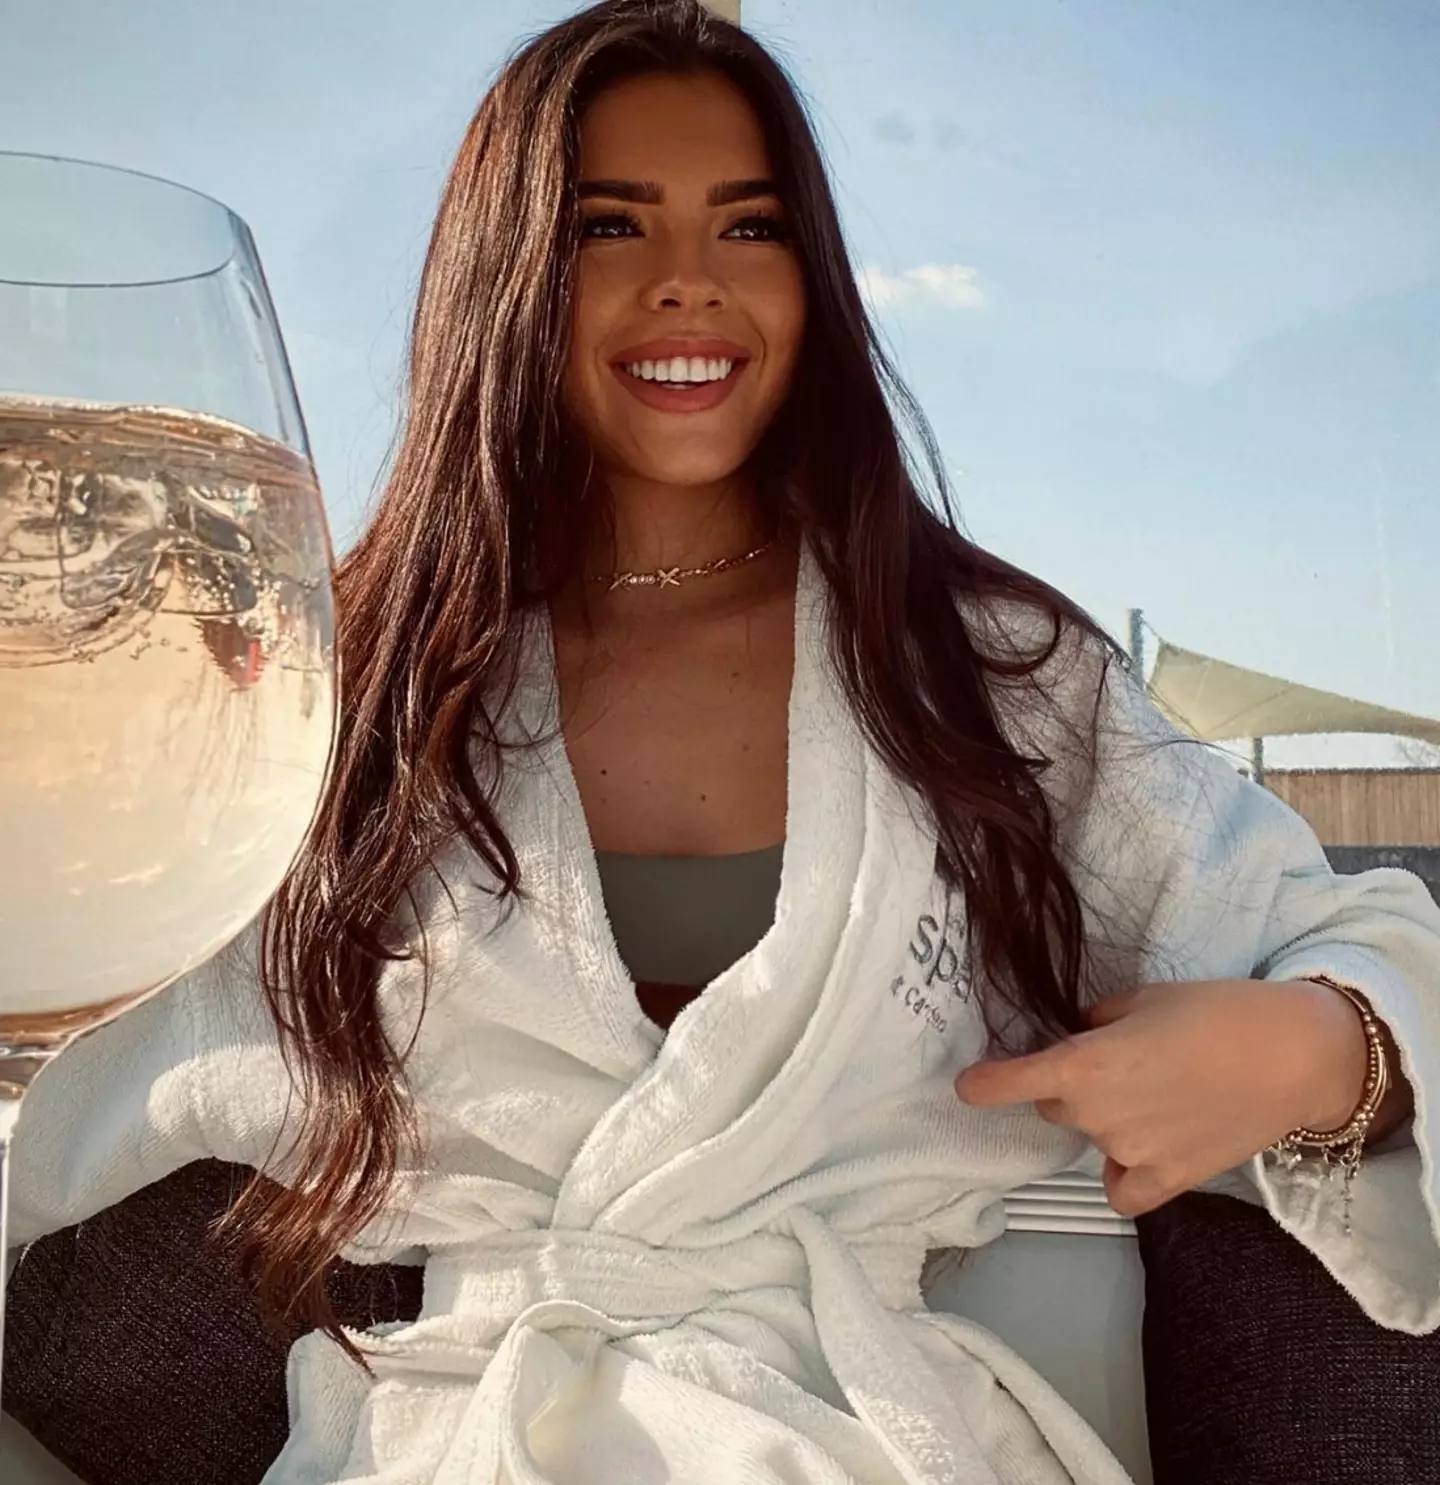 Love Island fans have also been scrolling through the Instagram account of Michael Owen's daughter, Gemma.